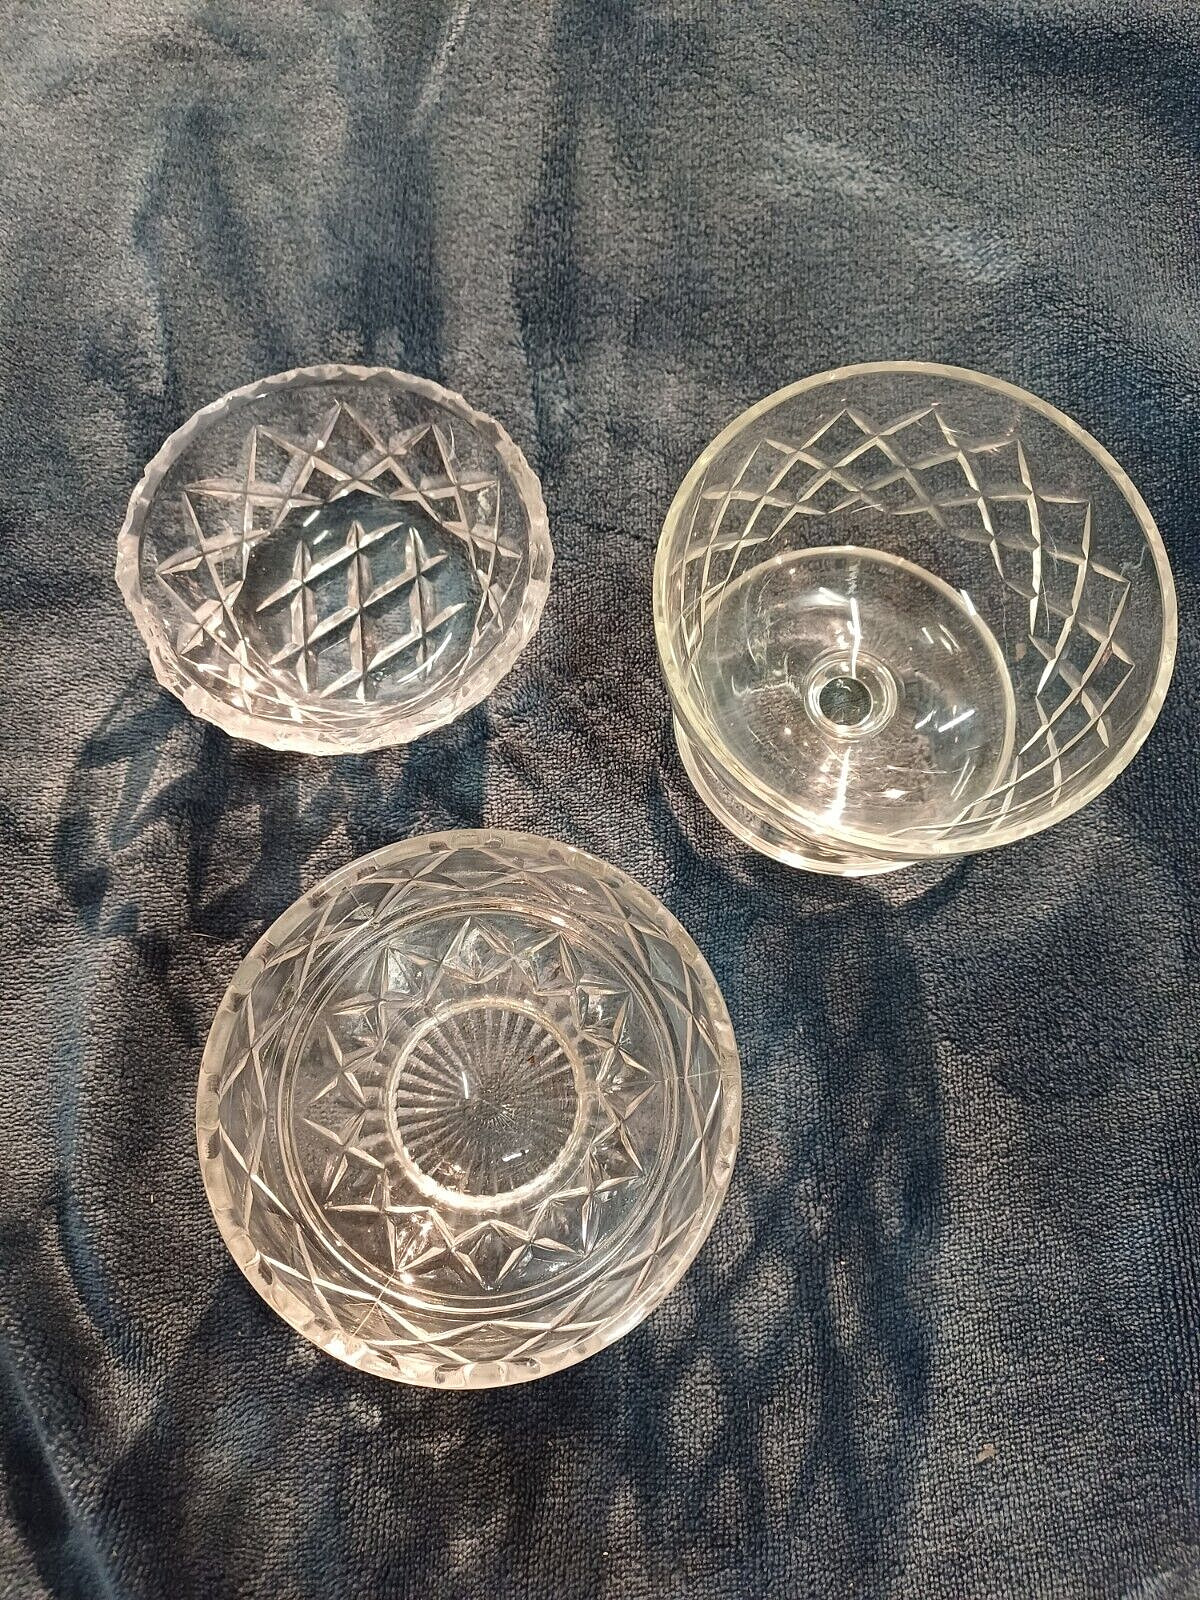 3 ASSORTED VINTAGE WATERFORD / BOHEMIAN CRYSTAL BOWLS